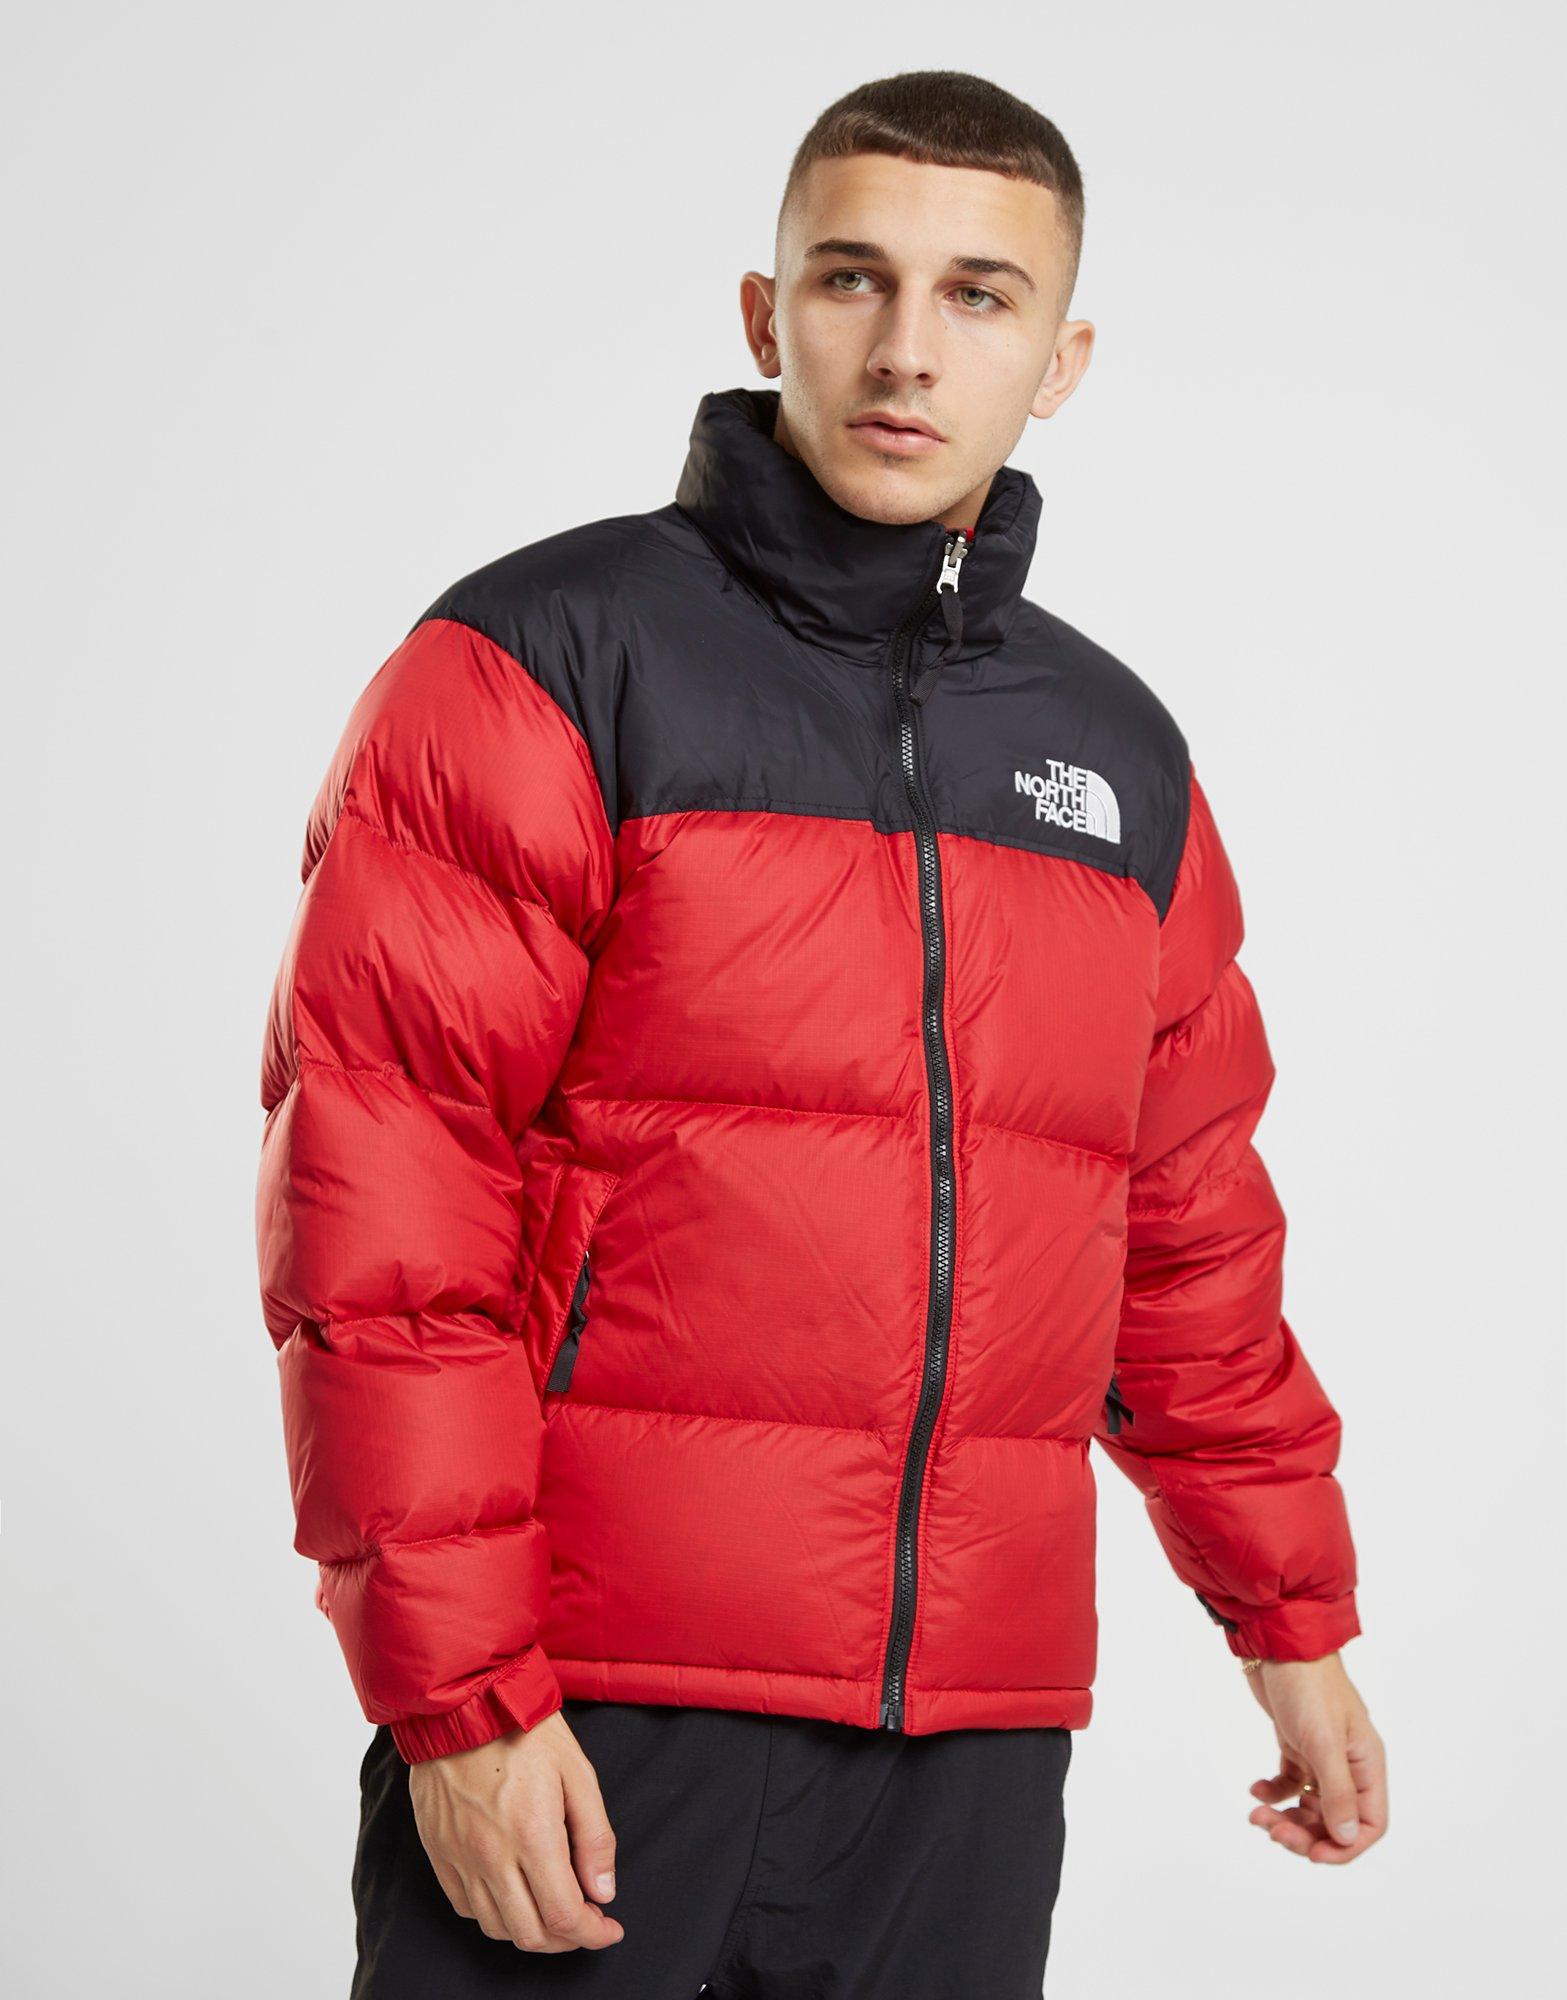 North face puffer jacket red and black 296550-North face puffer jacket